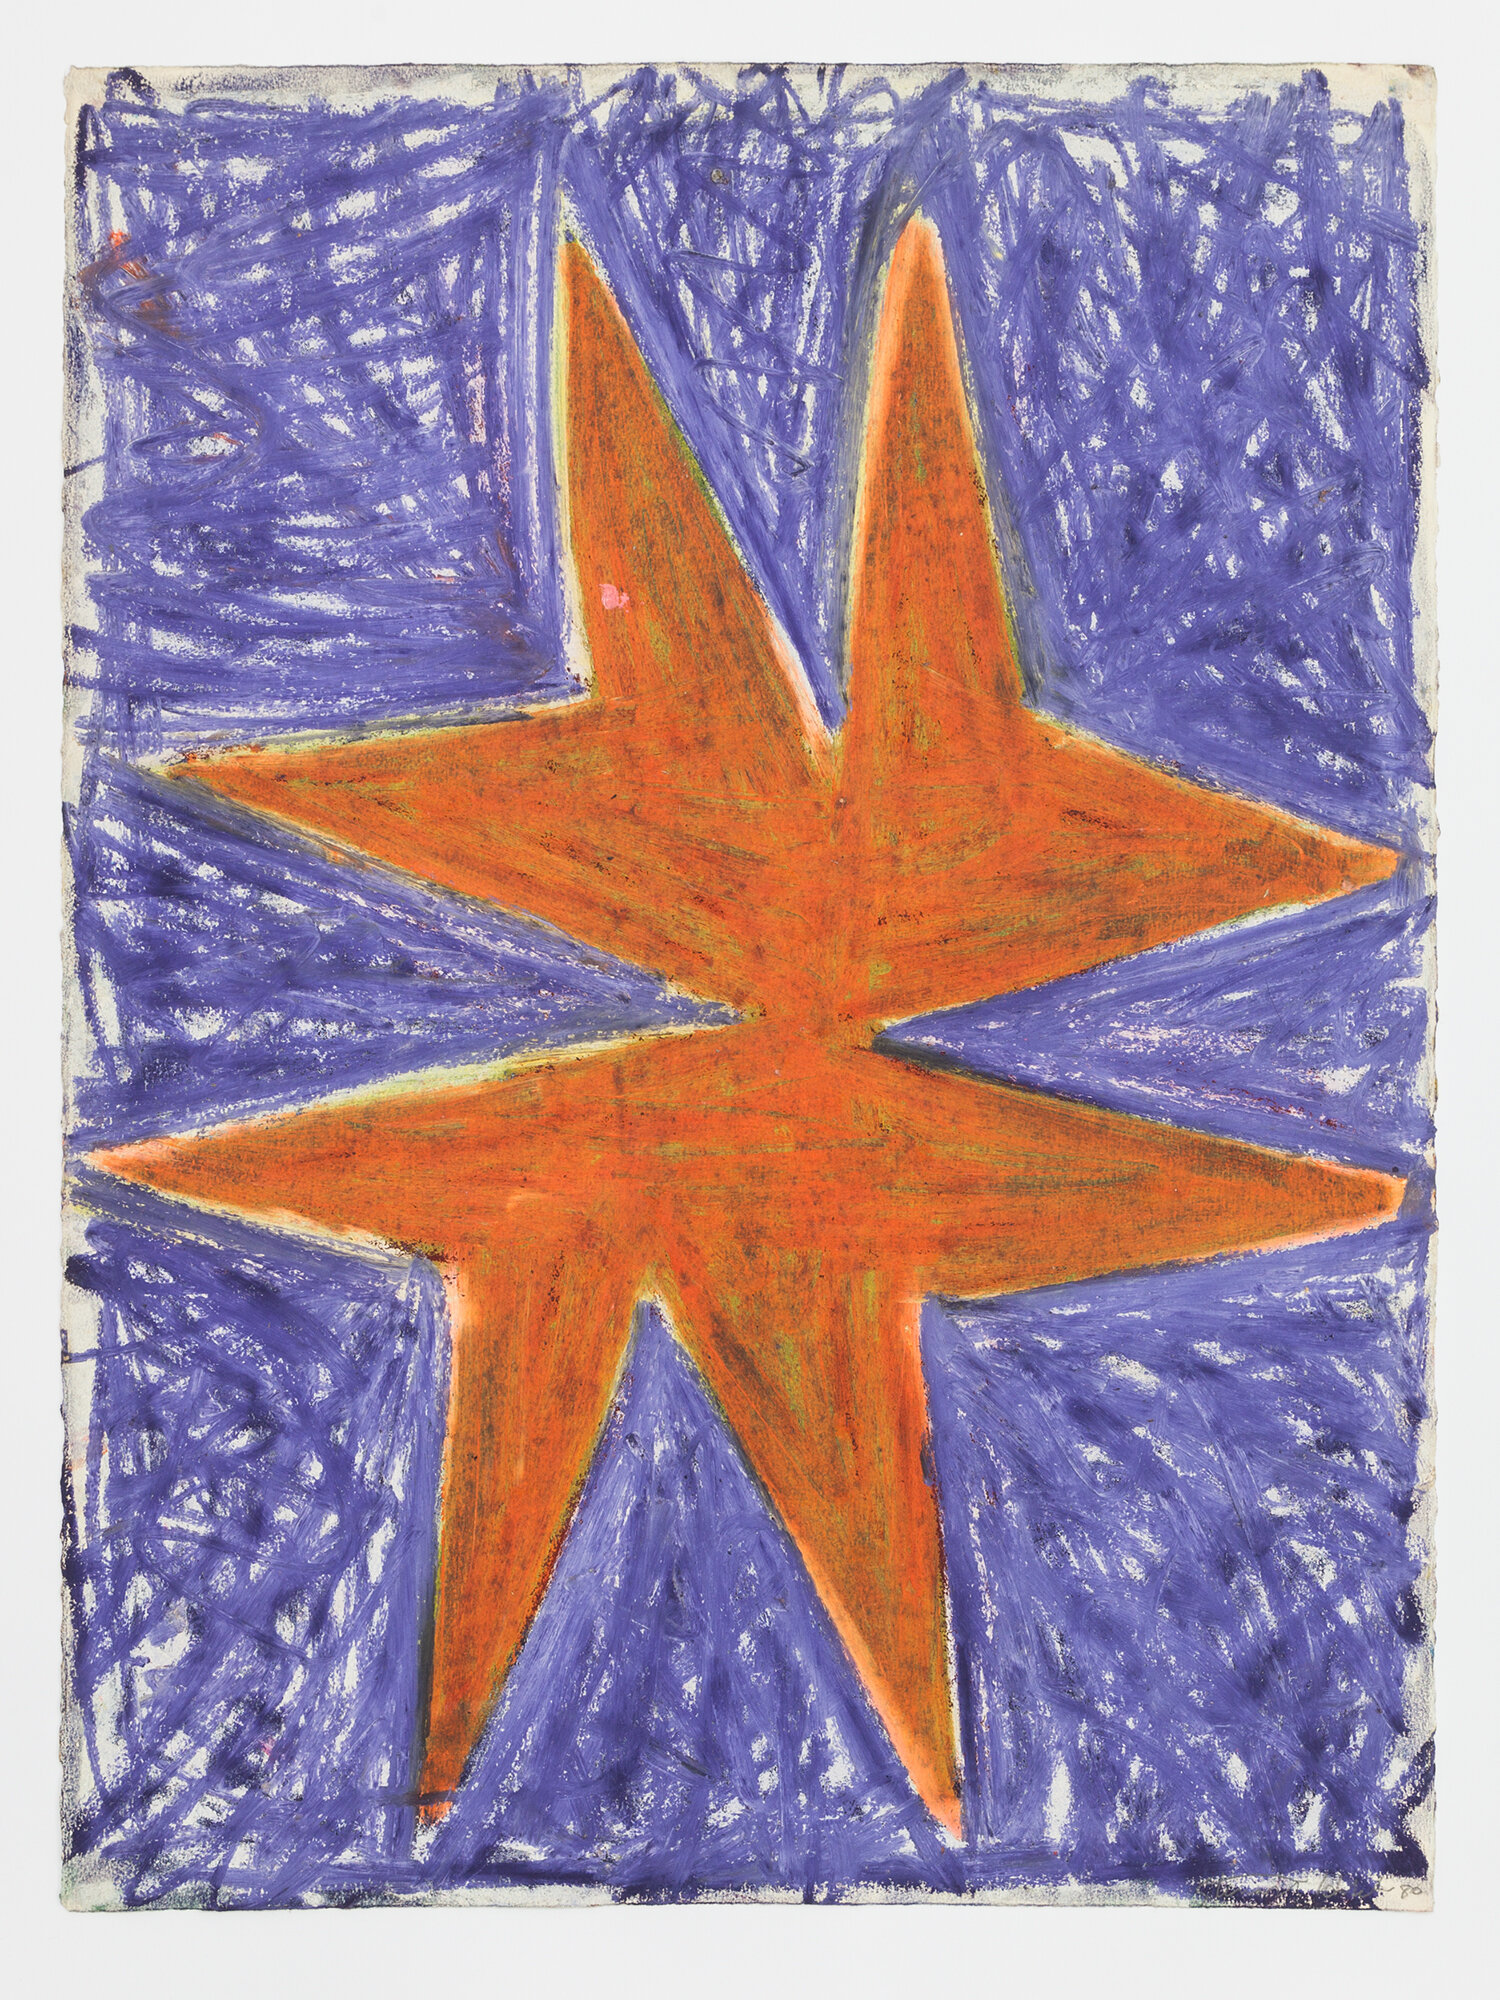  Stewart Hitch,  Untitled,  1980, Oil stick and pastel on paper 30 x 22 inches 